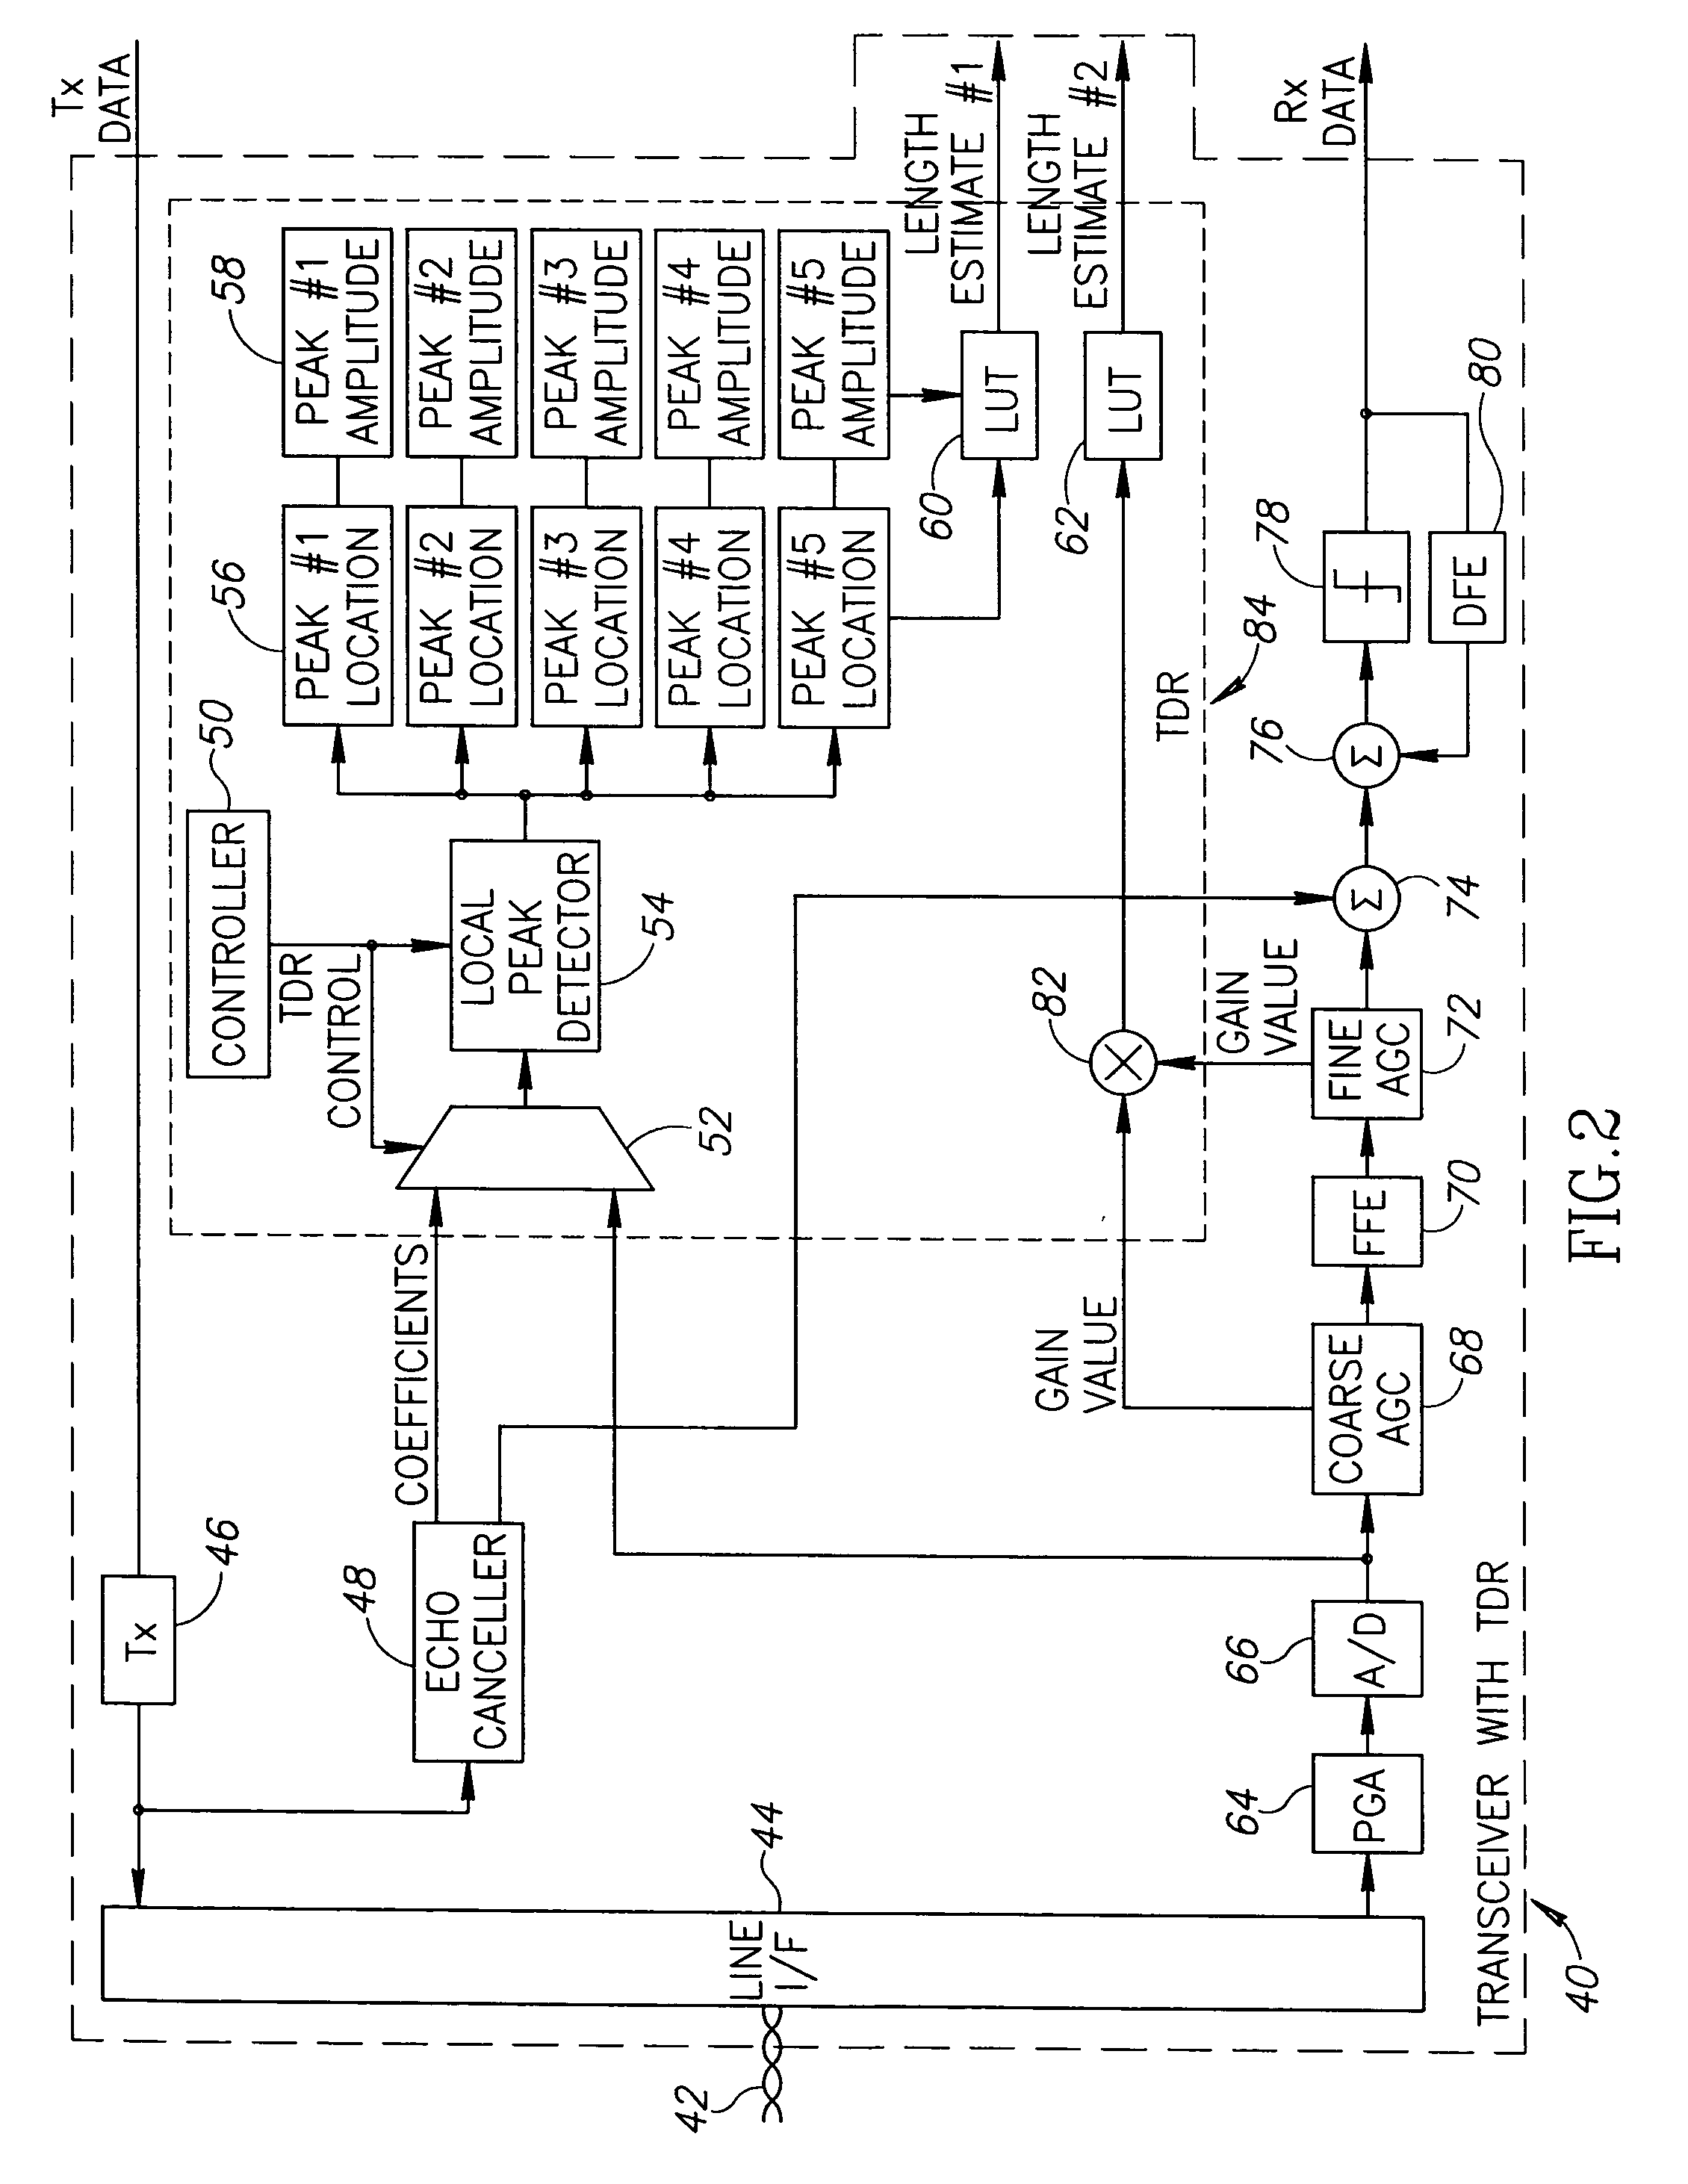 Apparatus for and method of cable diagnostics utilizing time domain reflectometry